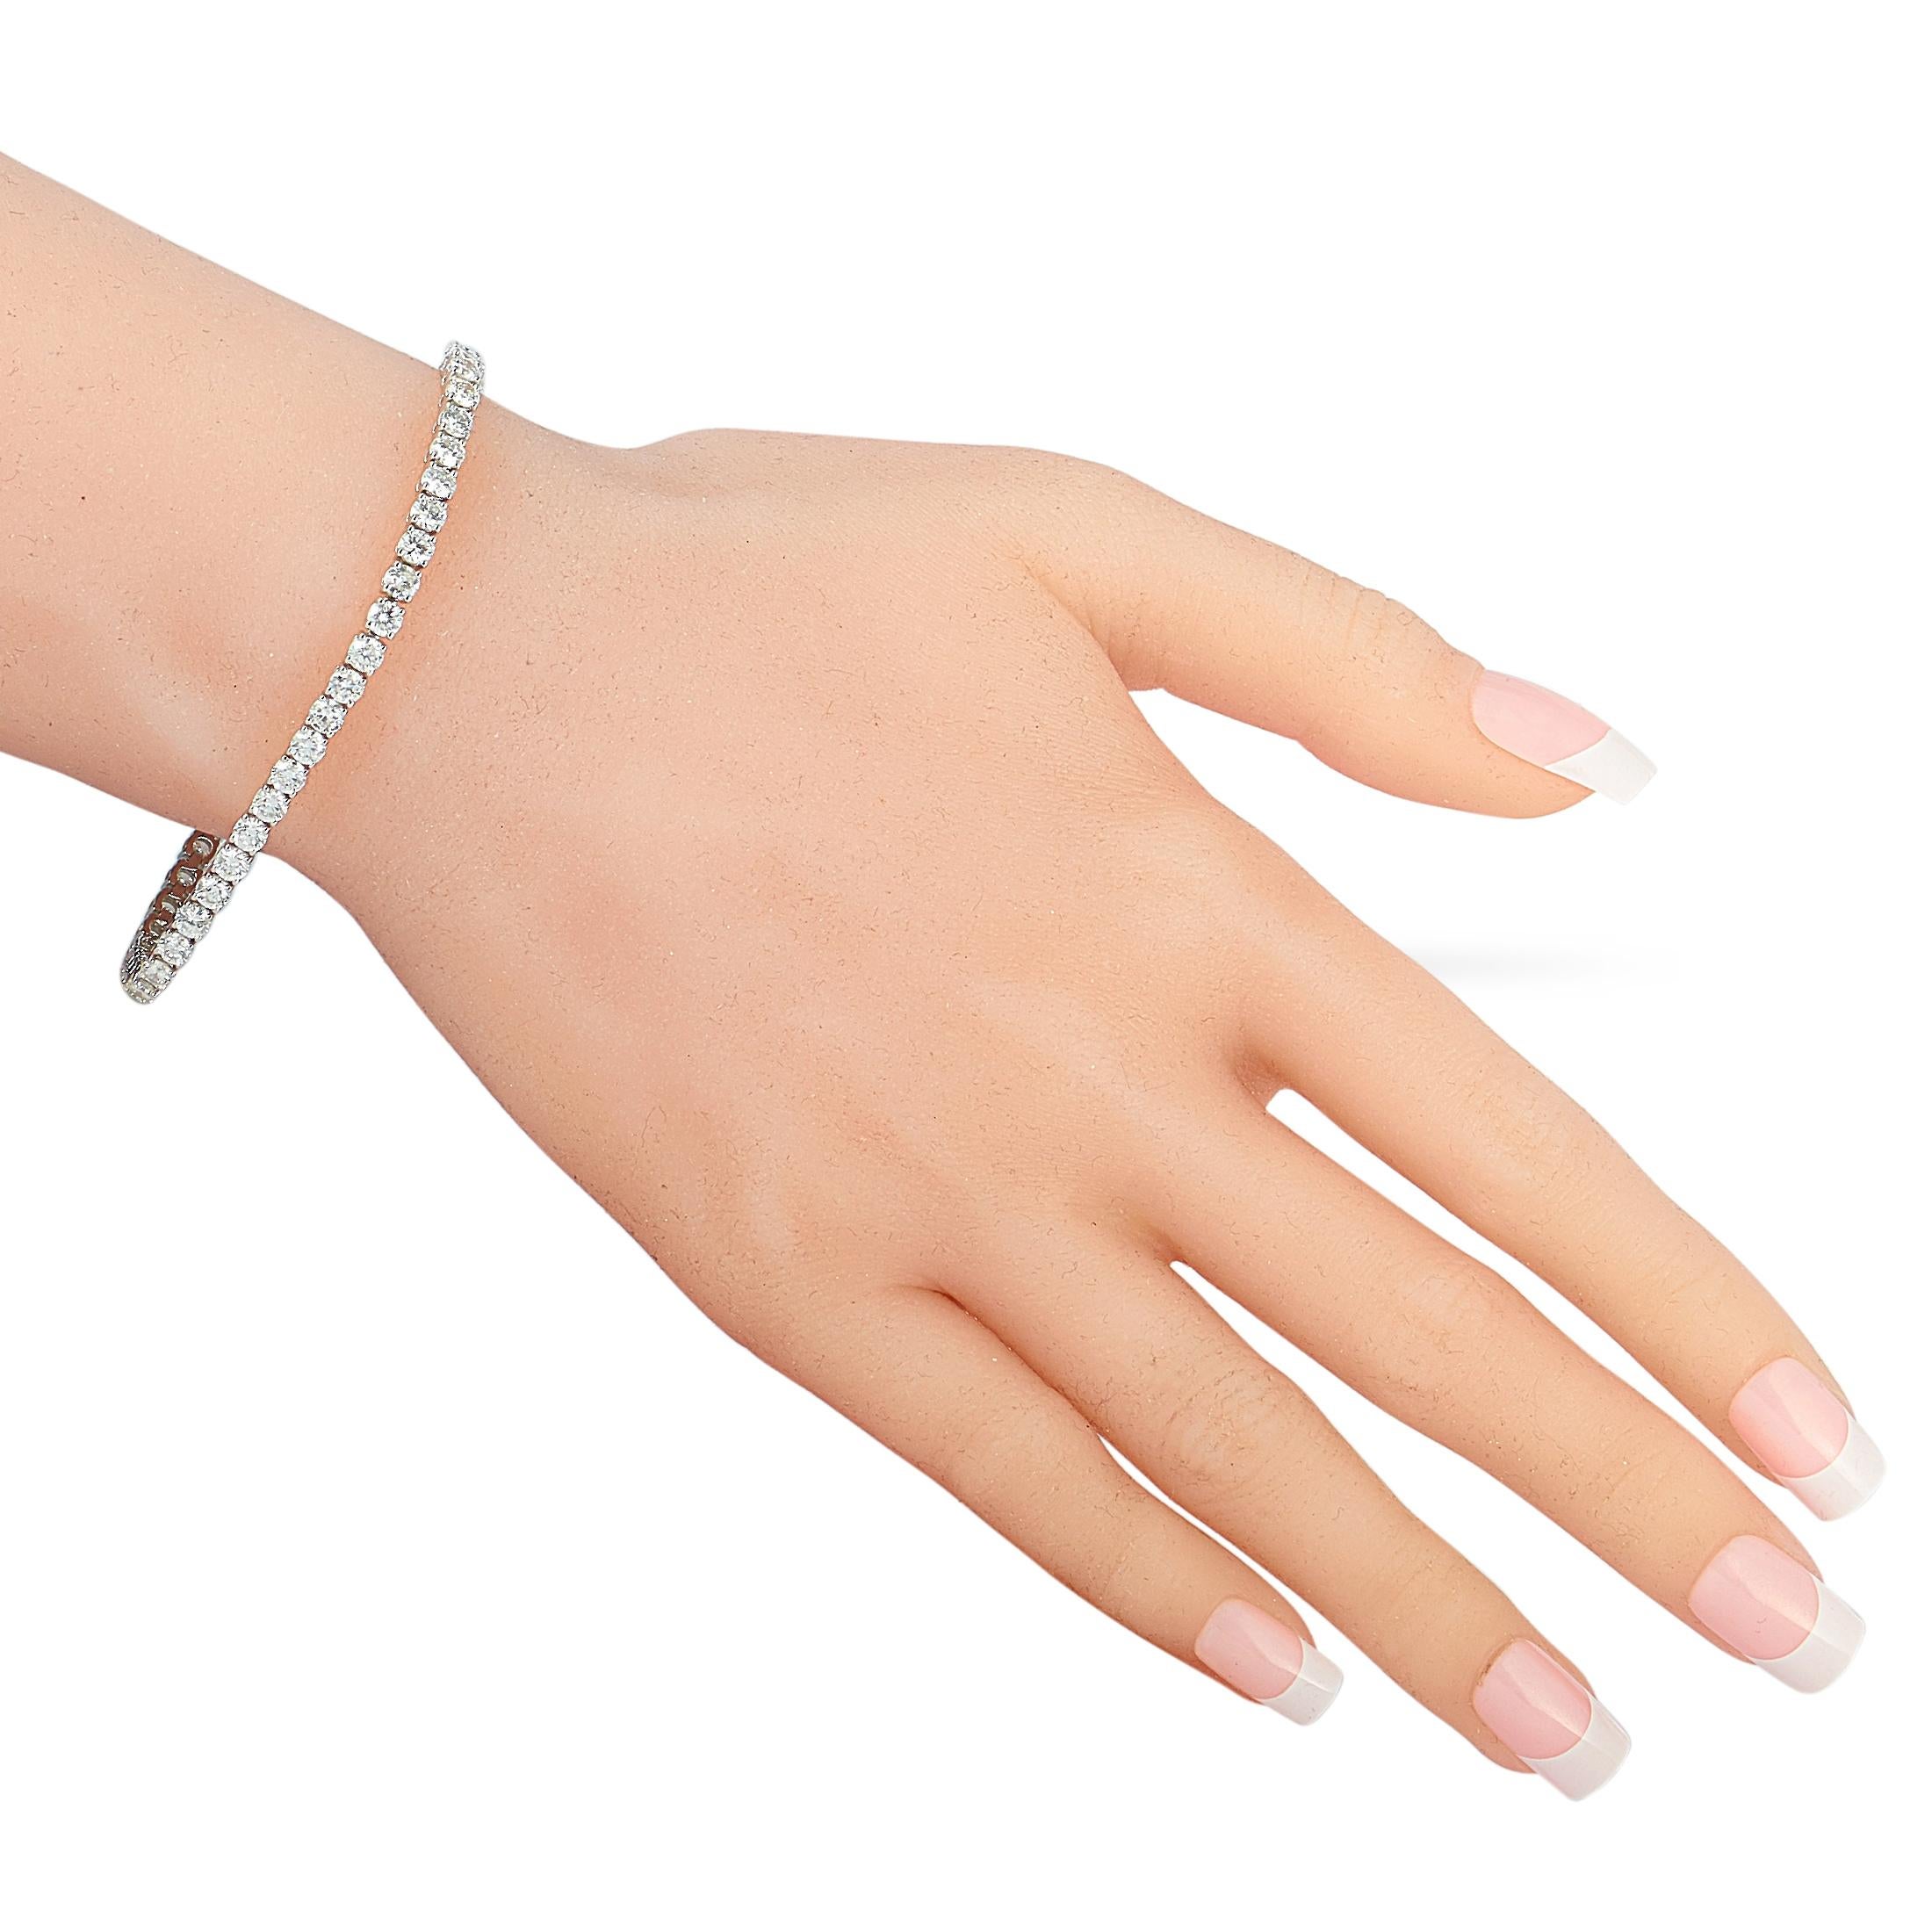 This LB Exclusive tennis bracelet is made of 14K white gold and embellished with diamonds that amount to 7.50 carats. The bracelet weighs 12.3 grams and measures 7.25” in length.
 
 Offered in brand new condition, this jewelry piece includes a gift